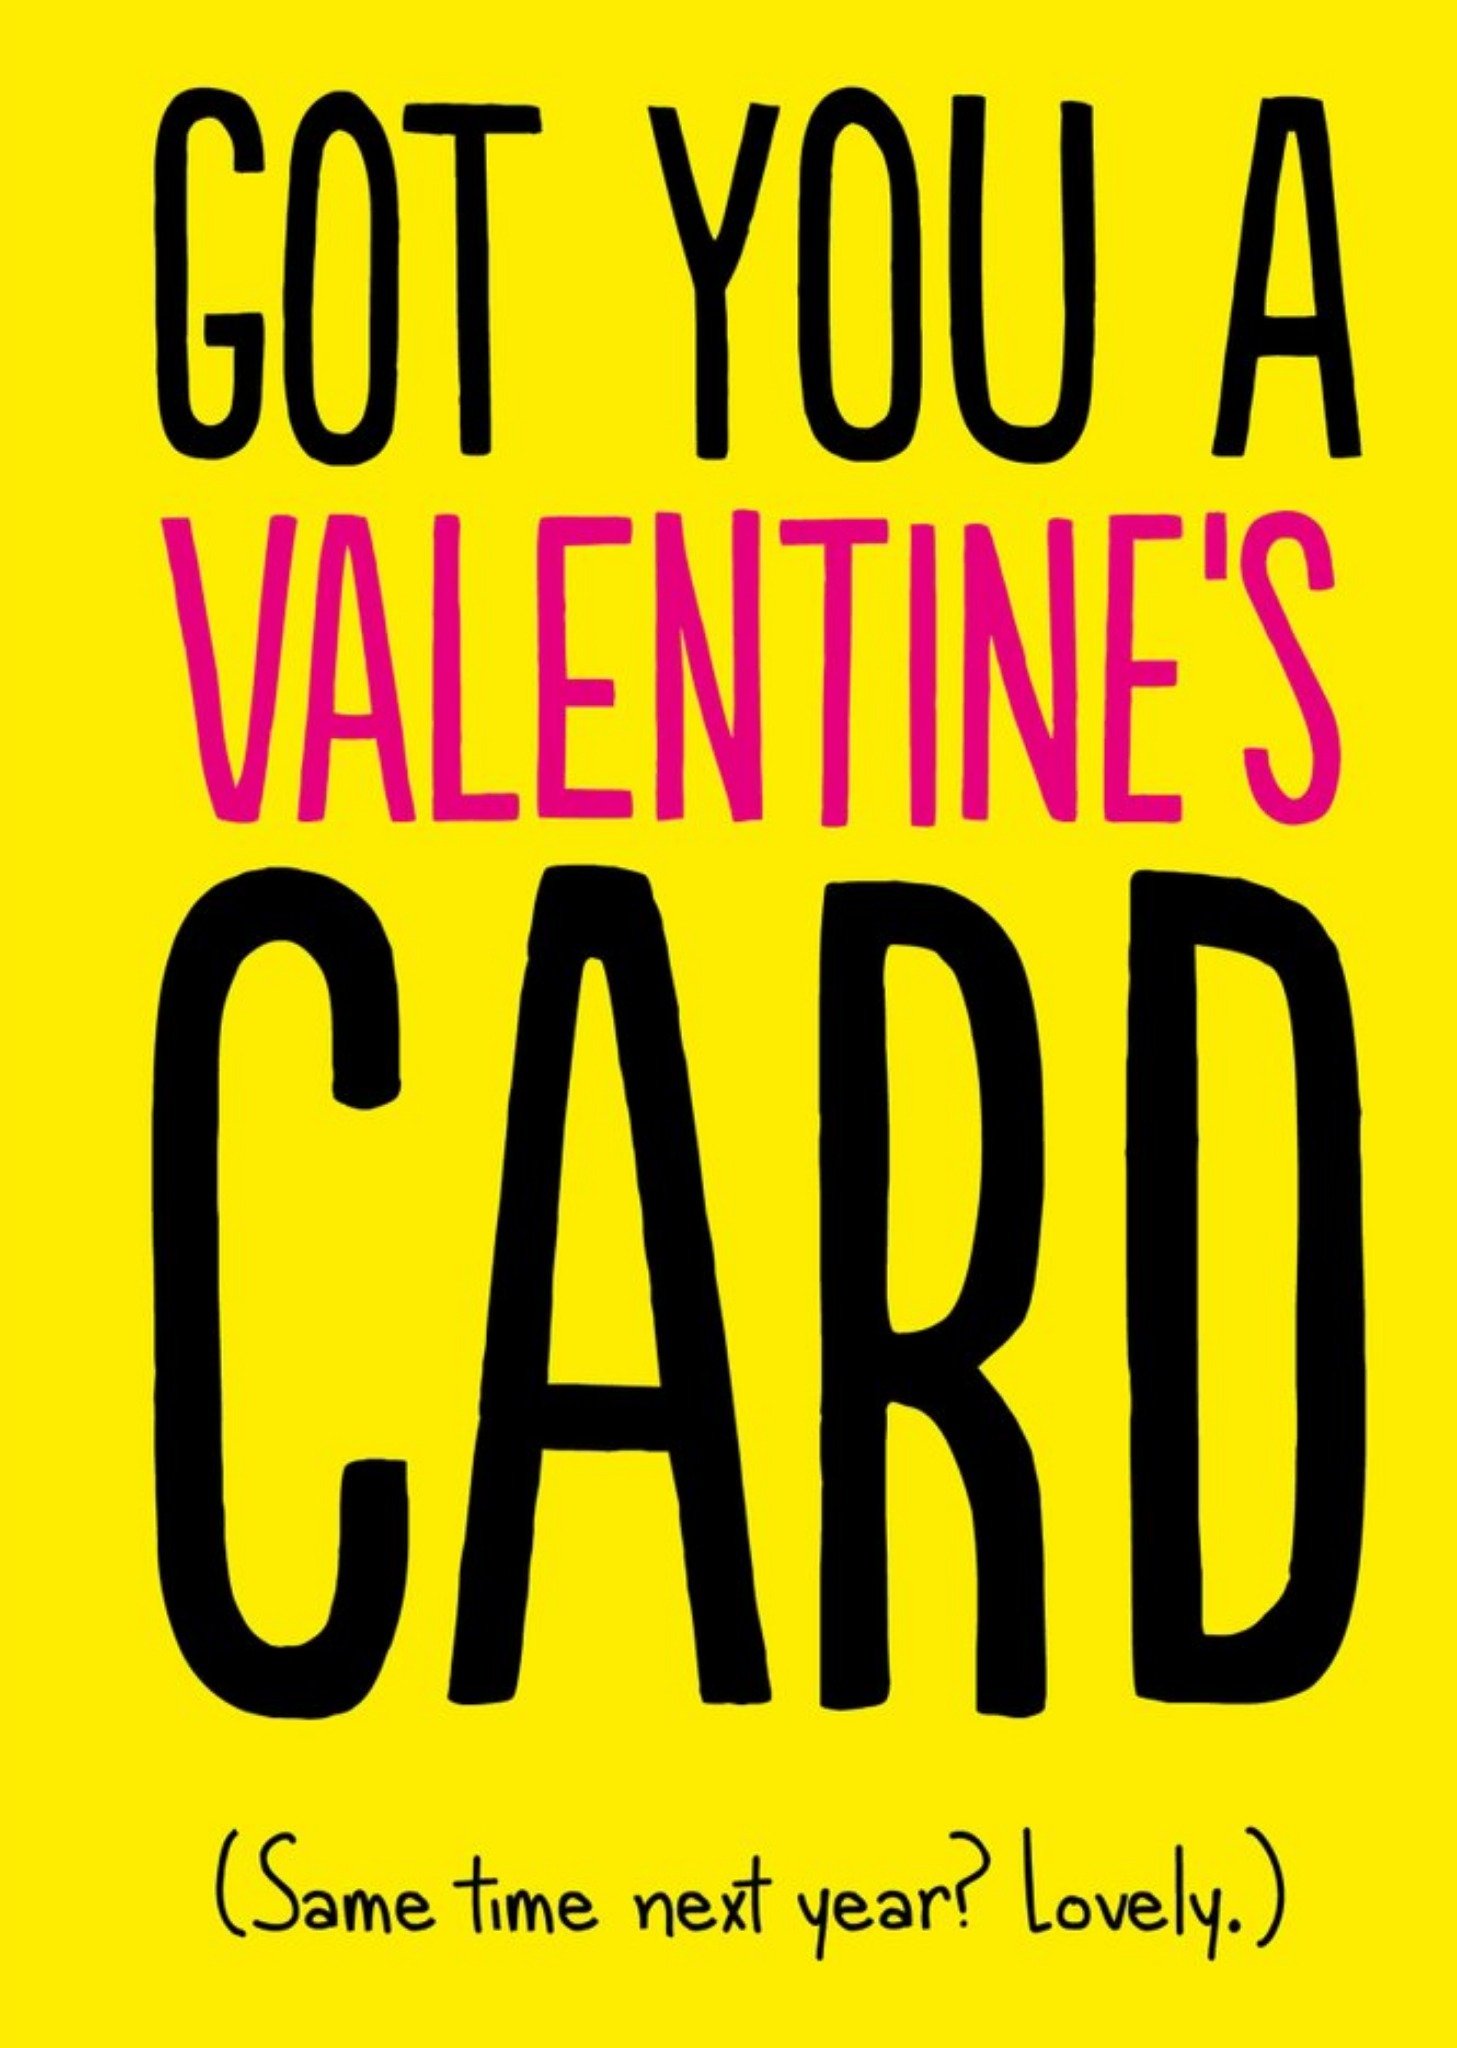 Moonpig Humourous Typography On A Vibrant Yellow Background Valentines Day Card Ecard